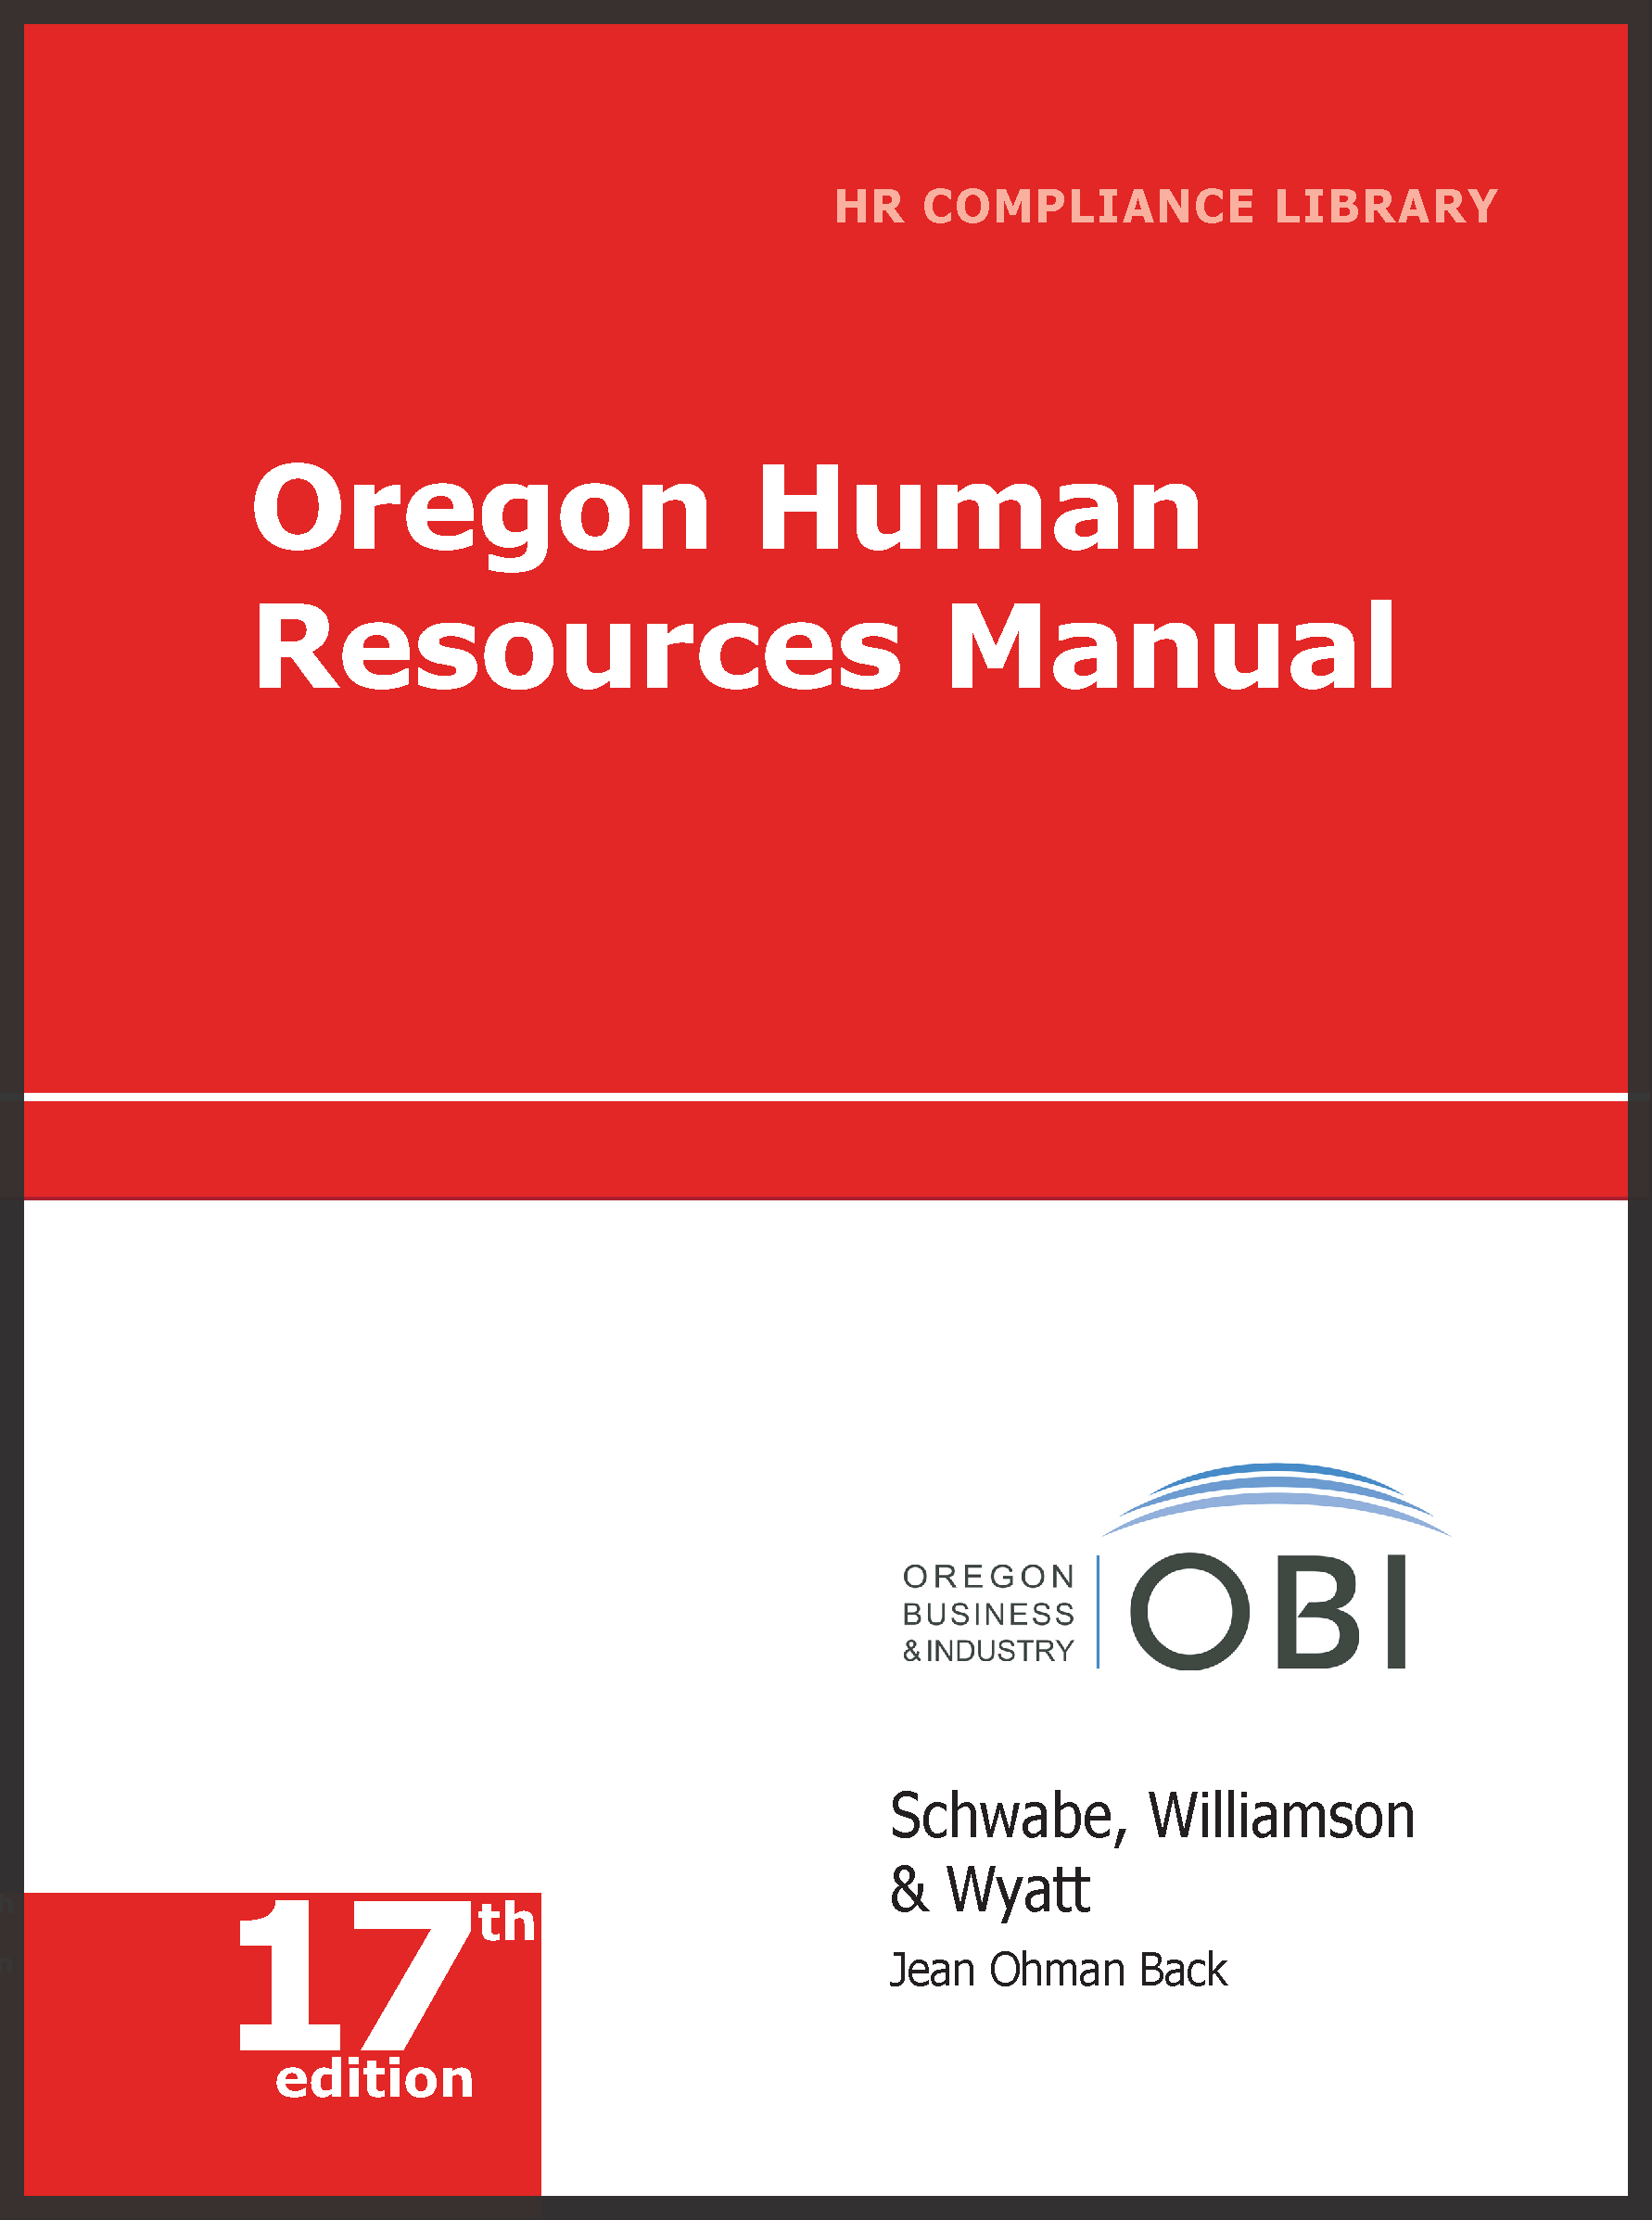 Oregon 7-Day Free Trial employment law image, remote work, labor laws, employment laws, right to work, order of protection, minimum wage